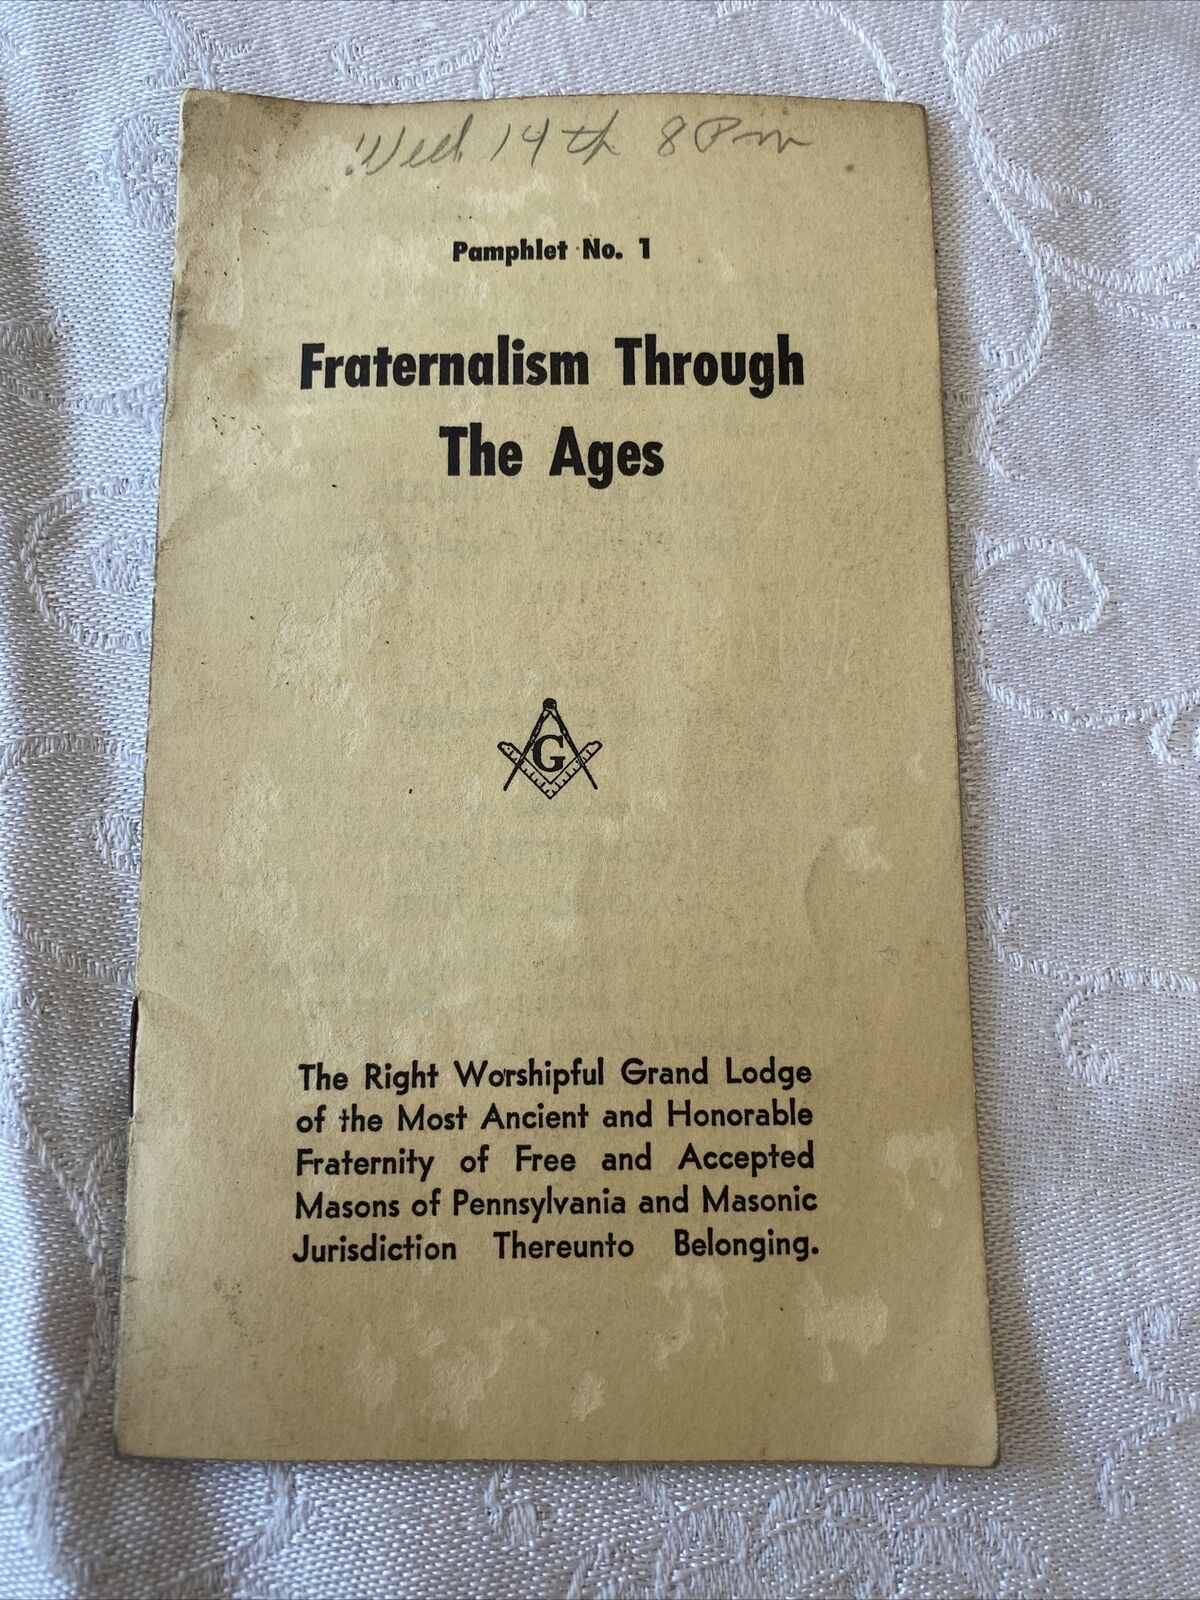 1958 Masonic Temple Booklet Fraternalism Through The Ages Masons Of Pennsylvania